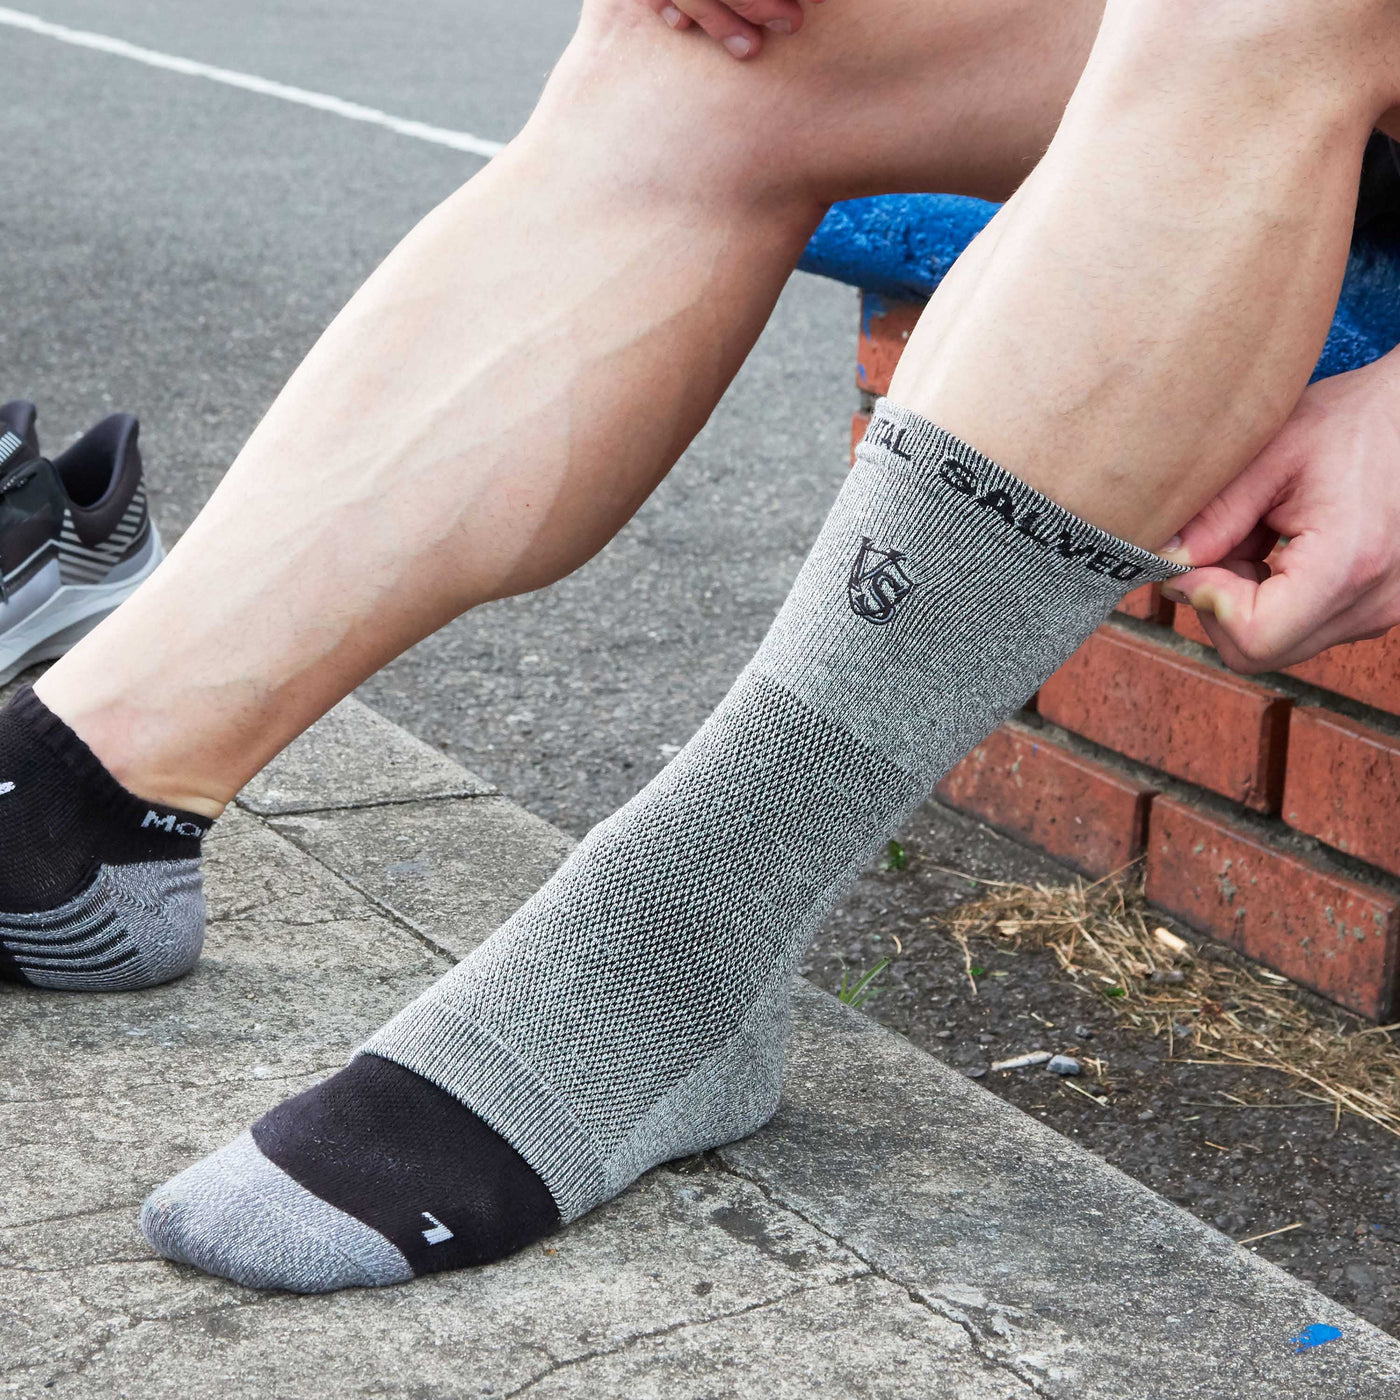 How to Choose An Ankle Brace For Sports Or Recovery?